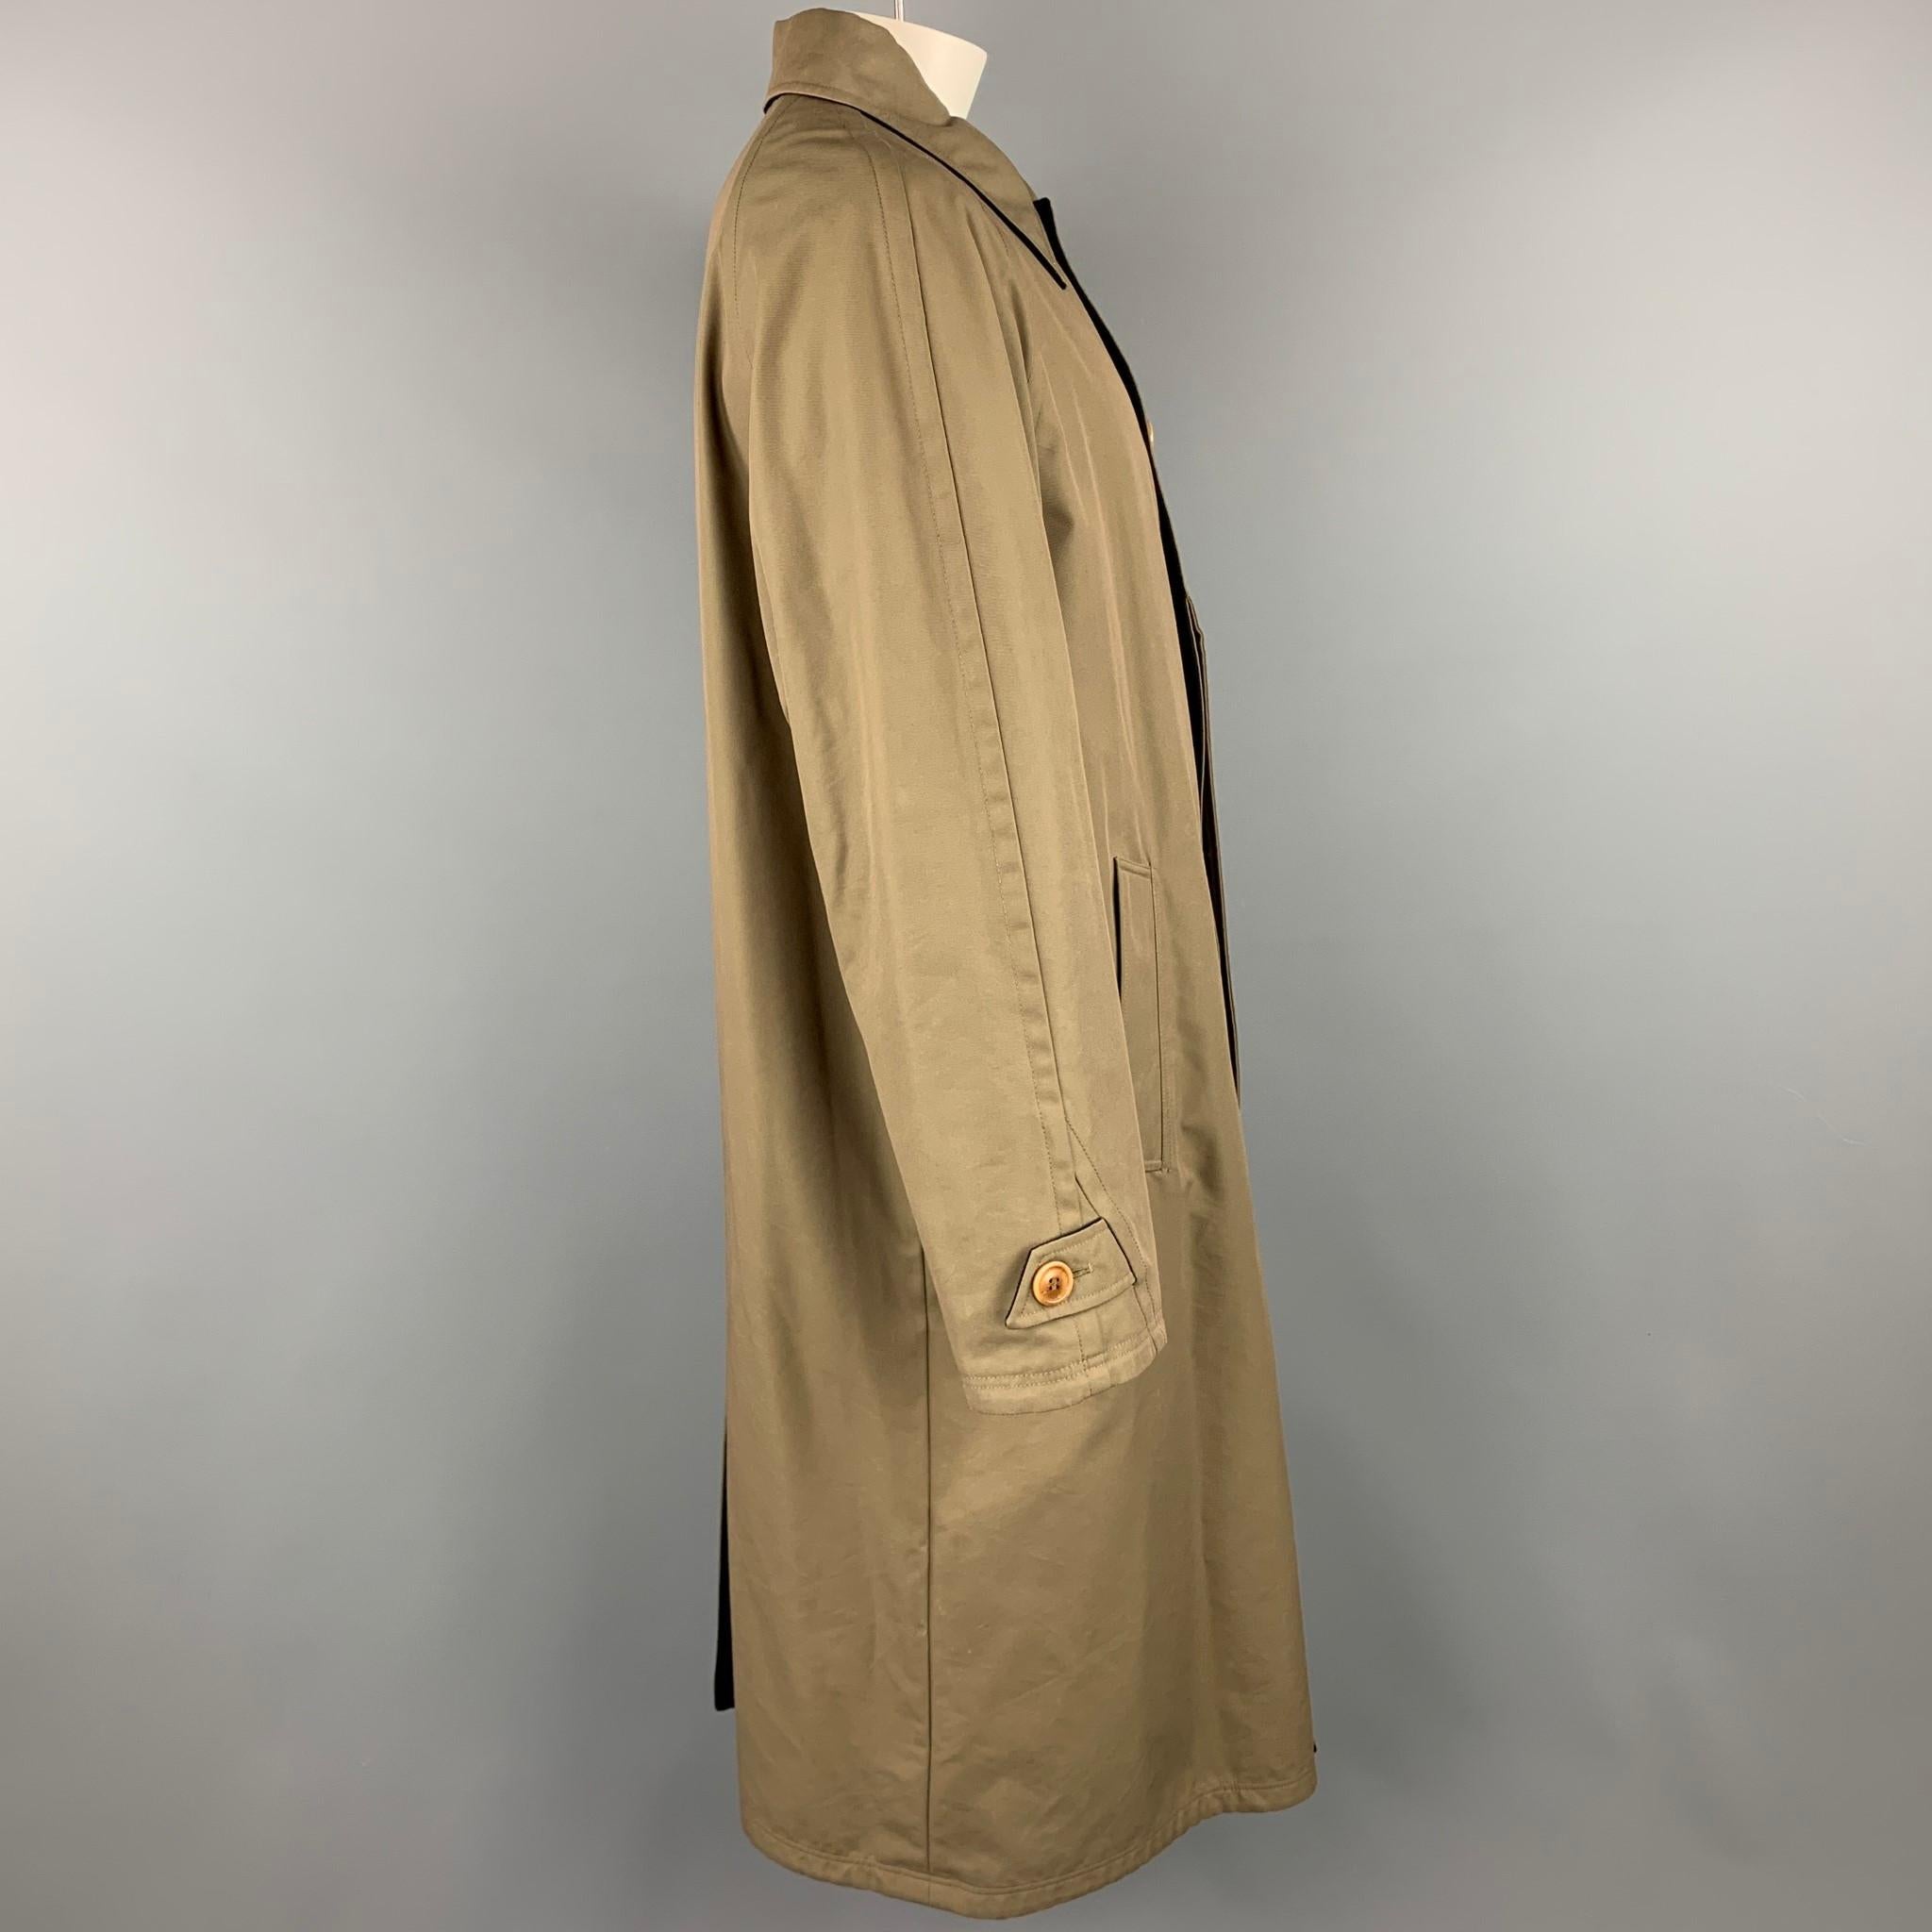 ERMENEGILDO ZEGNA coat comes in a olive & black wool blend featuring a reversible style, slit pockets, spread collar, and a hidden button closure. Moderate wear. Made in Italy.

Good Pre-Owned Condition.
Marked: L/52

Measurements:

Shoulder: 18.5